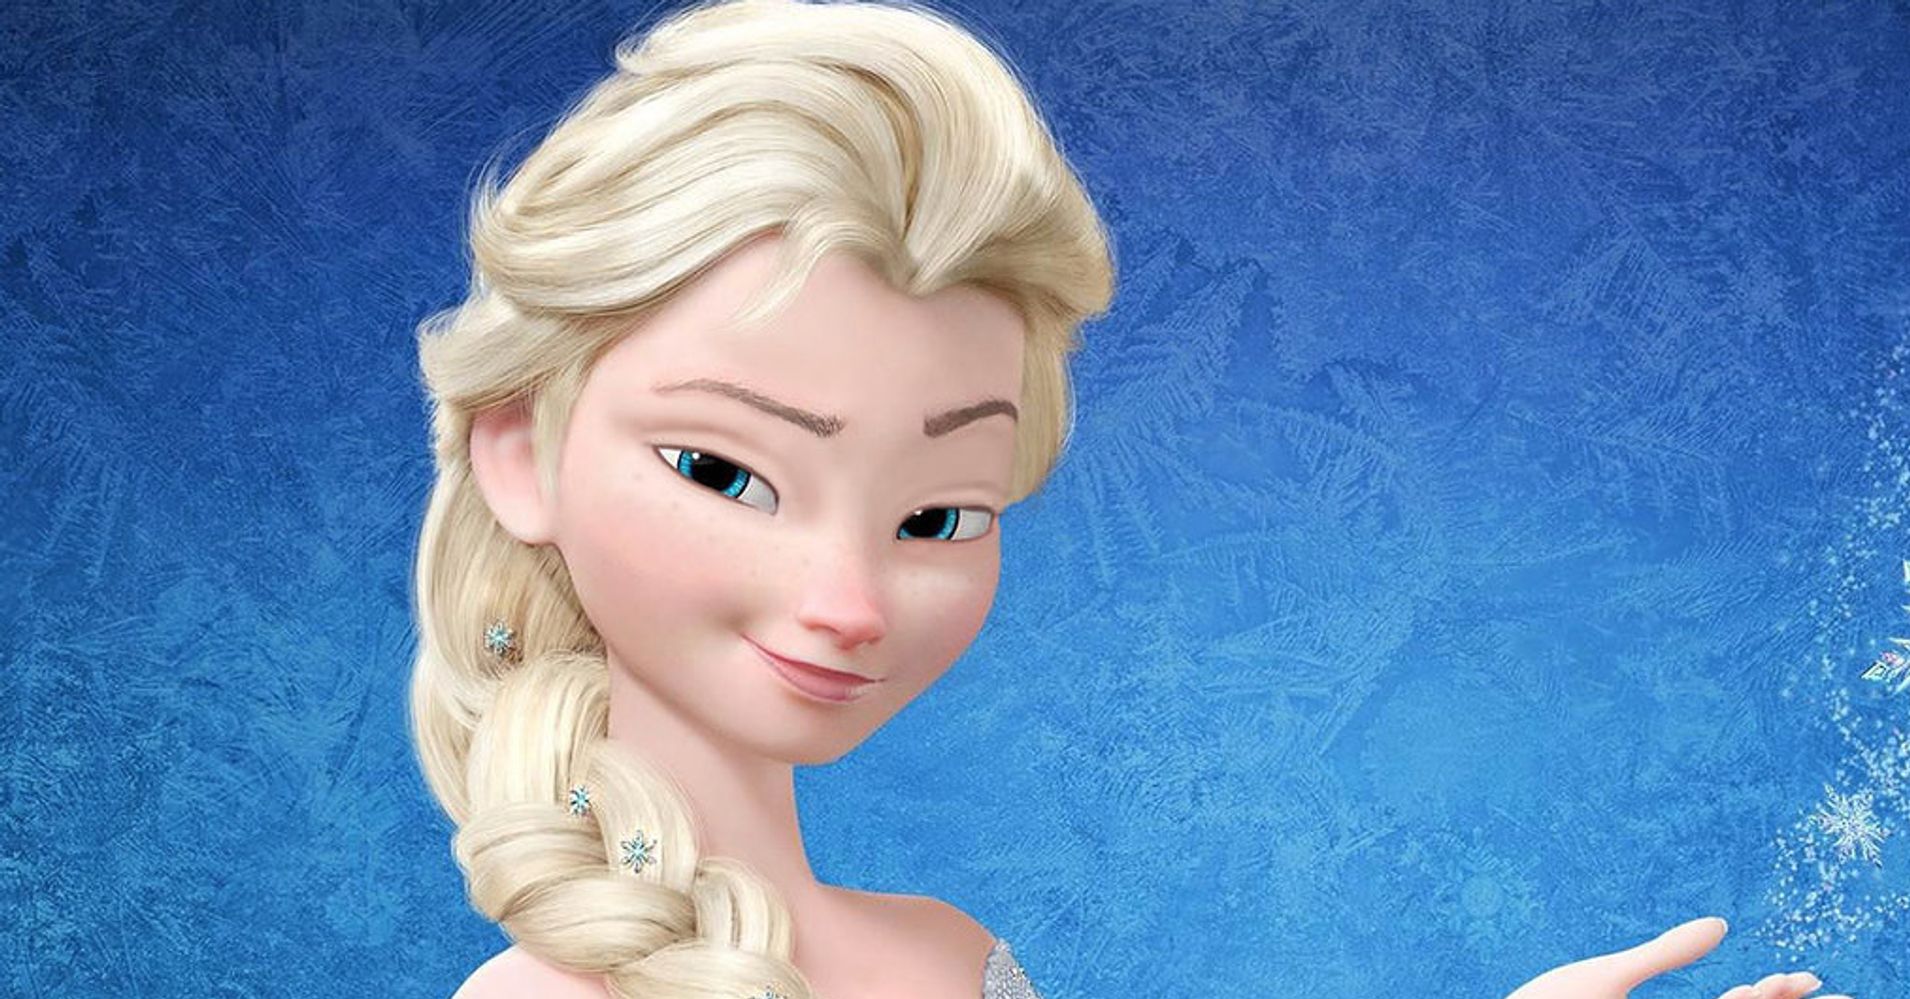 Disney Princesses Without Makeup Are Delightfully Fresh-Faced | HuffPost